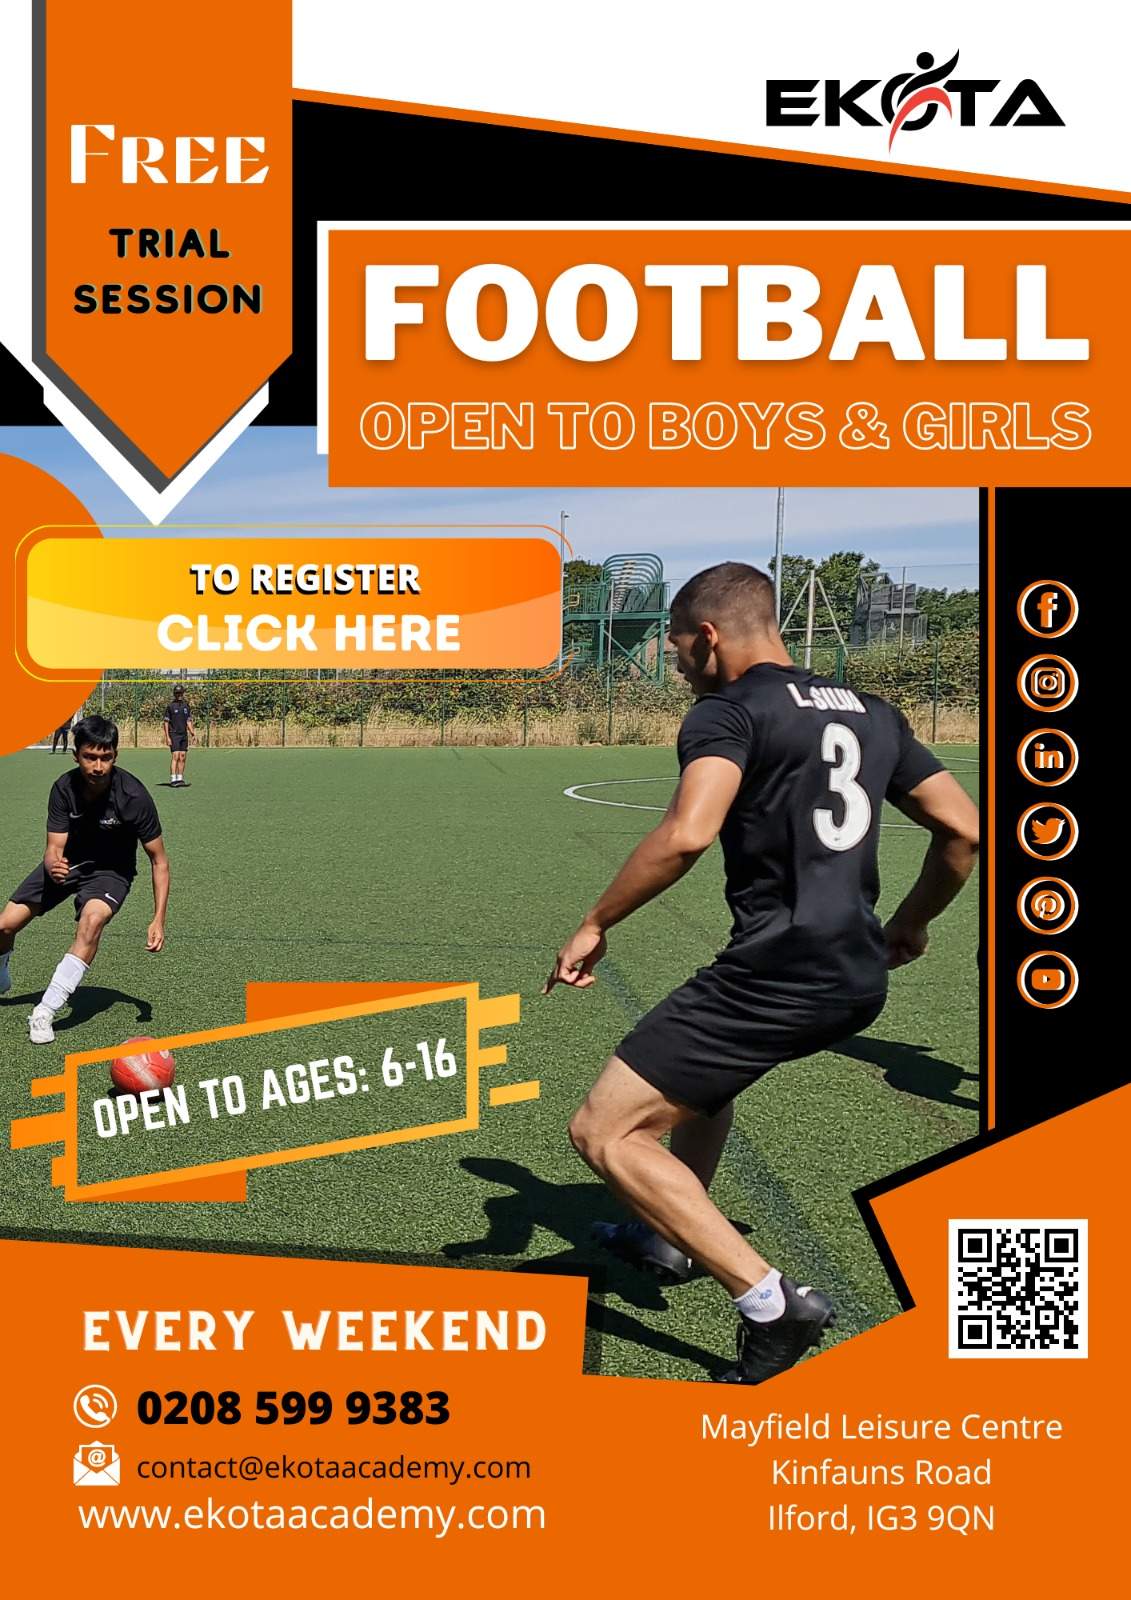 Football Free Trial Session